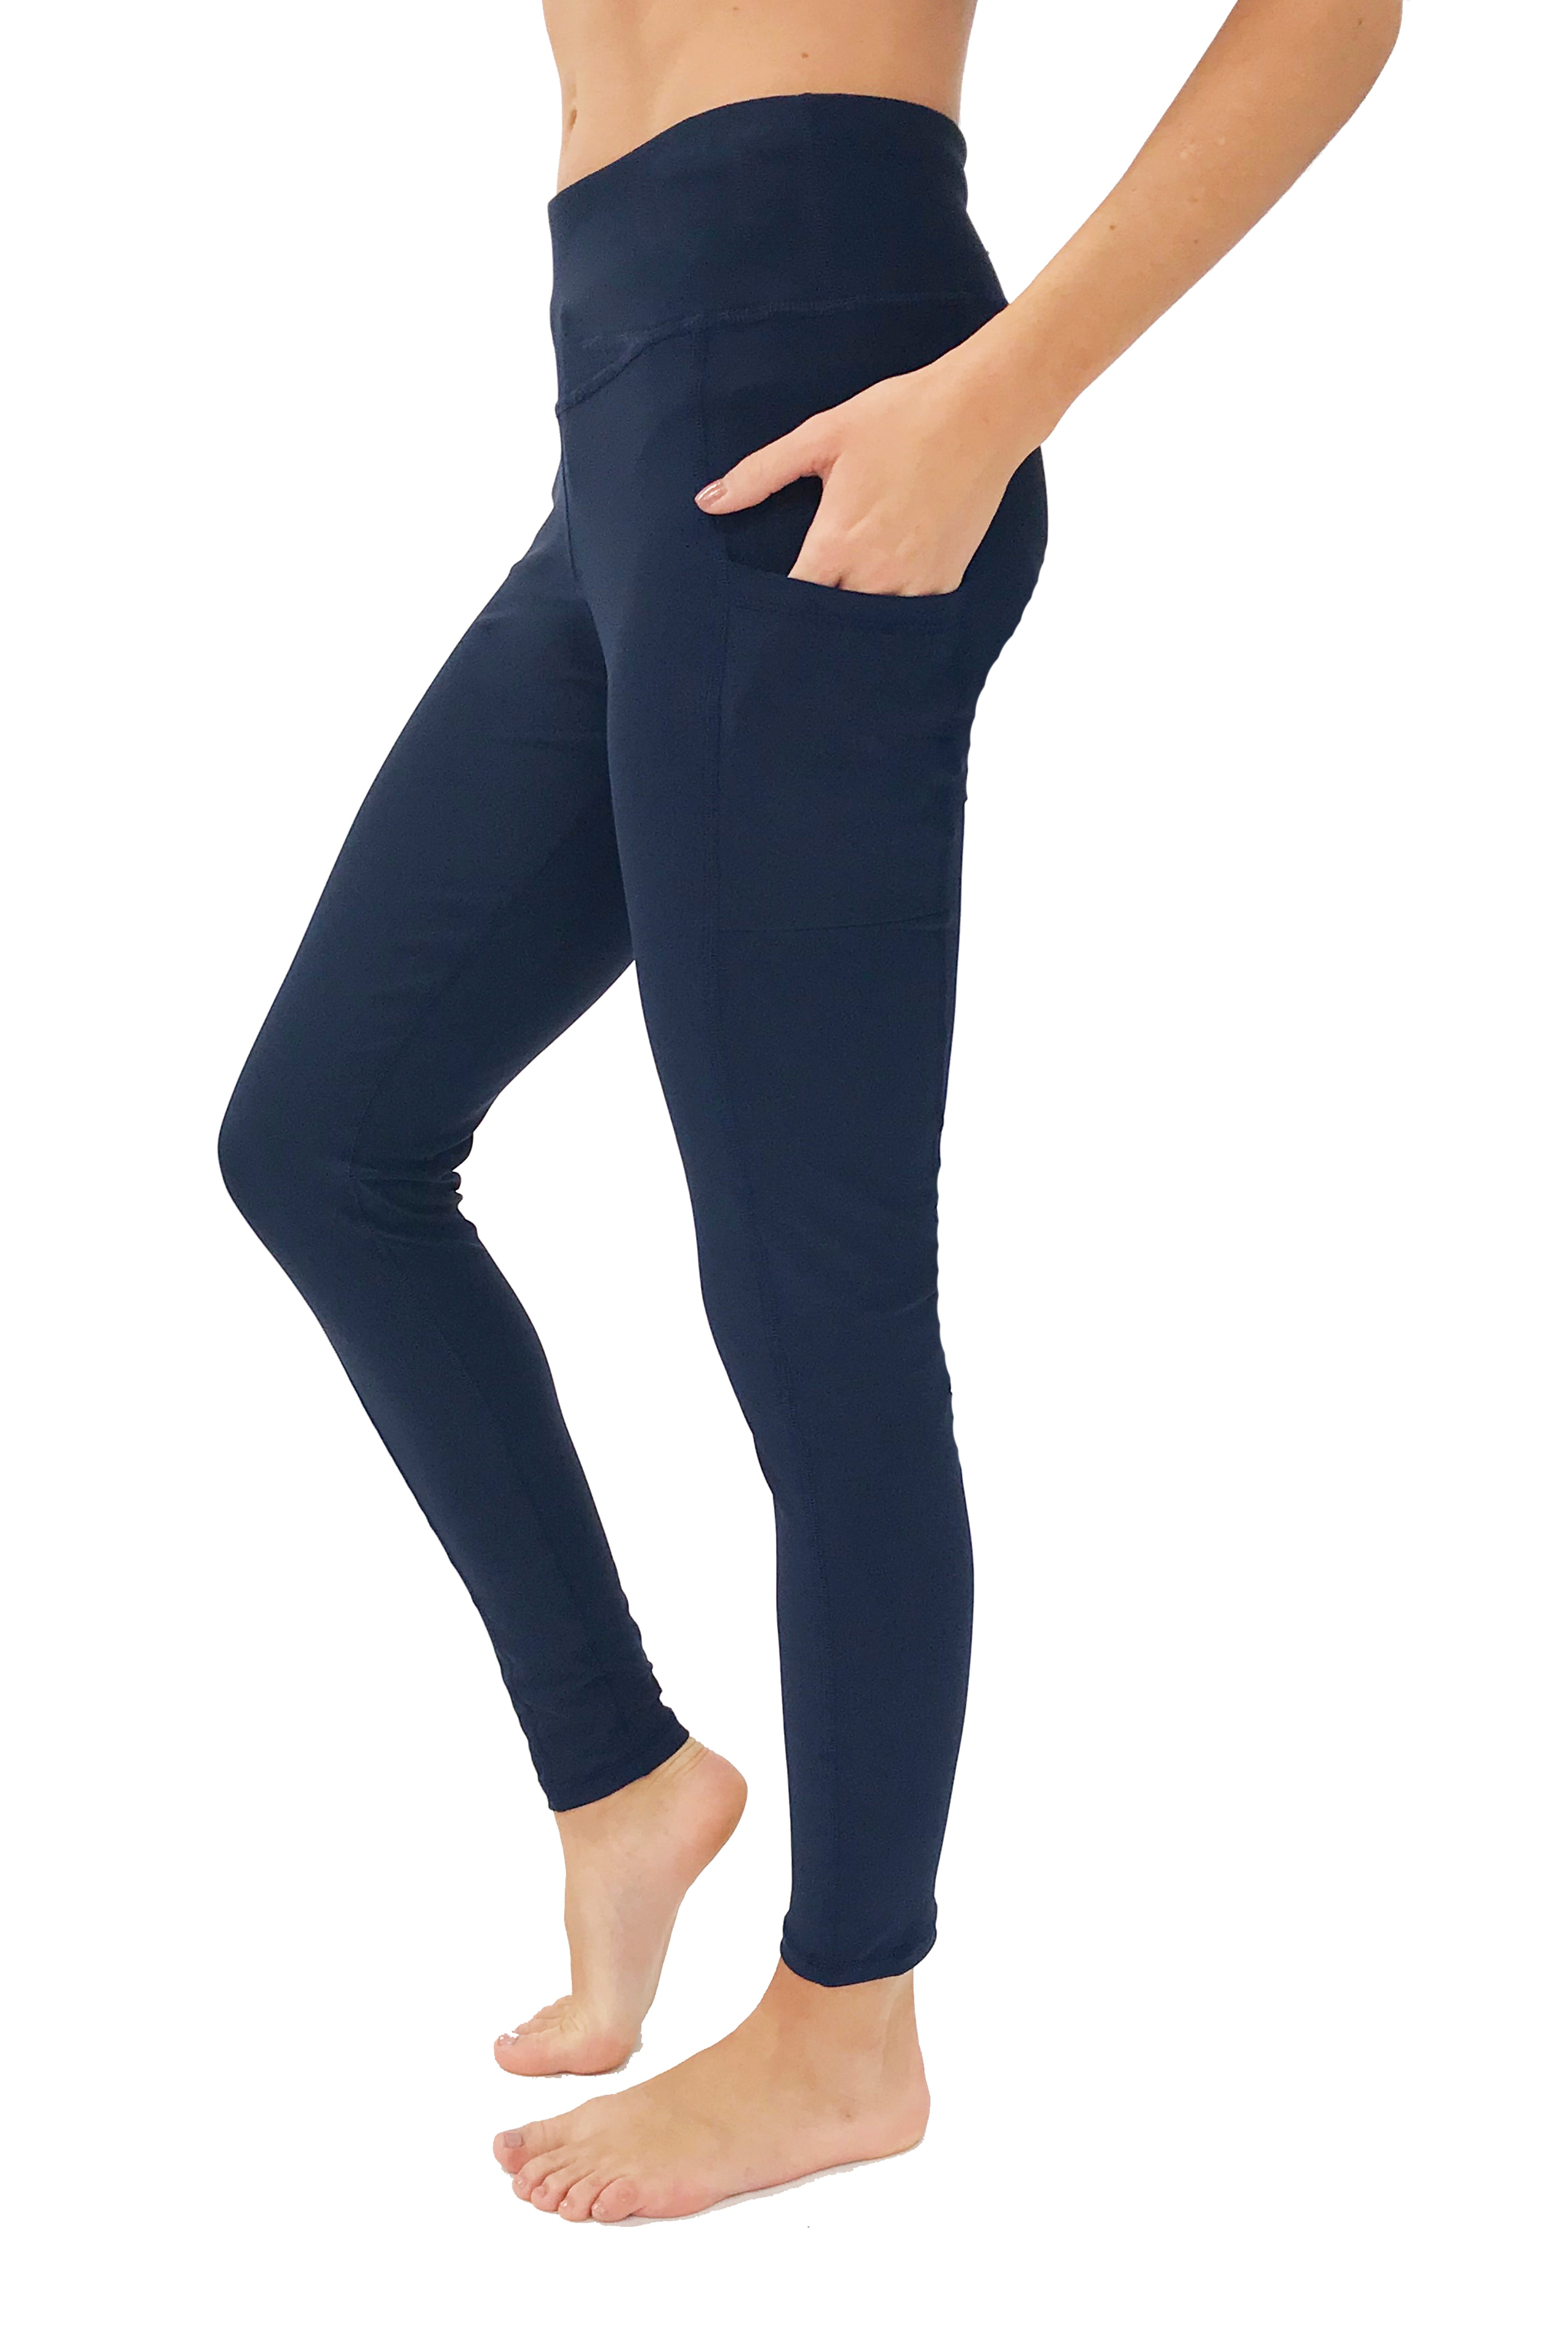 Navy Blue Leggings With Pockets